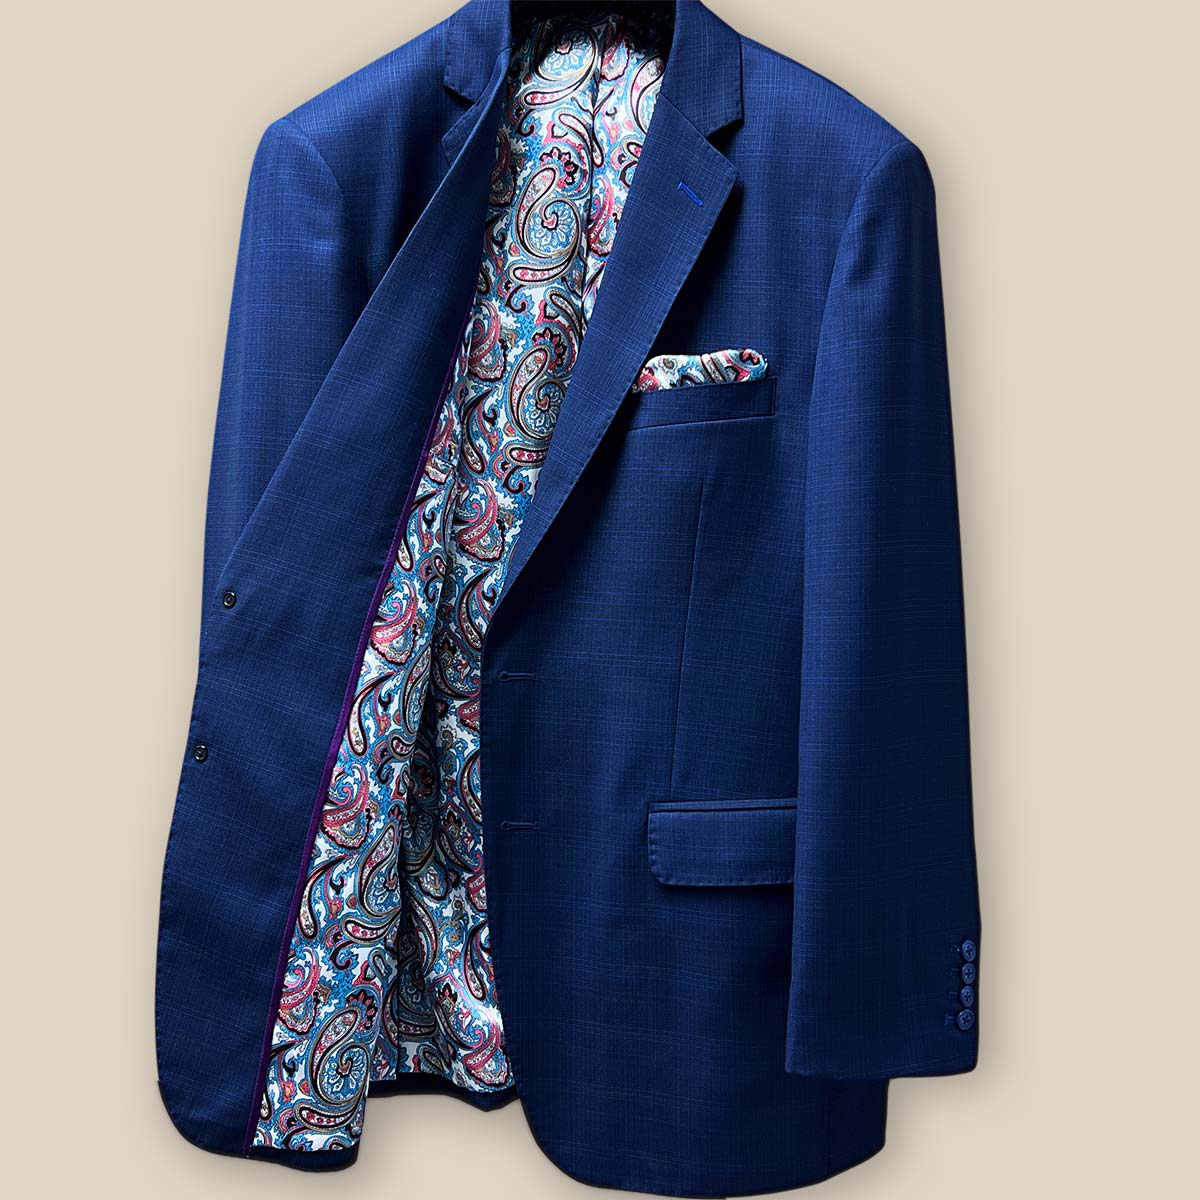 Inside right view of the royal blue suit jacket featuring additional pockets and the fancy paisley lining.